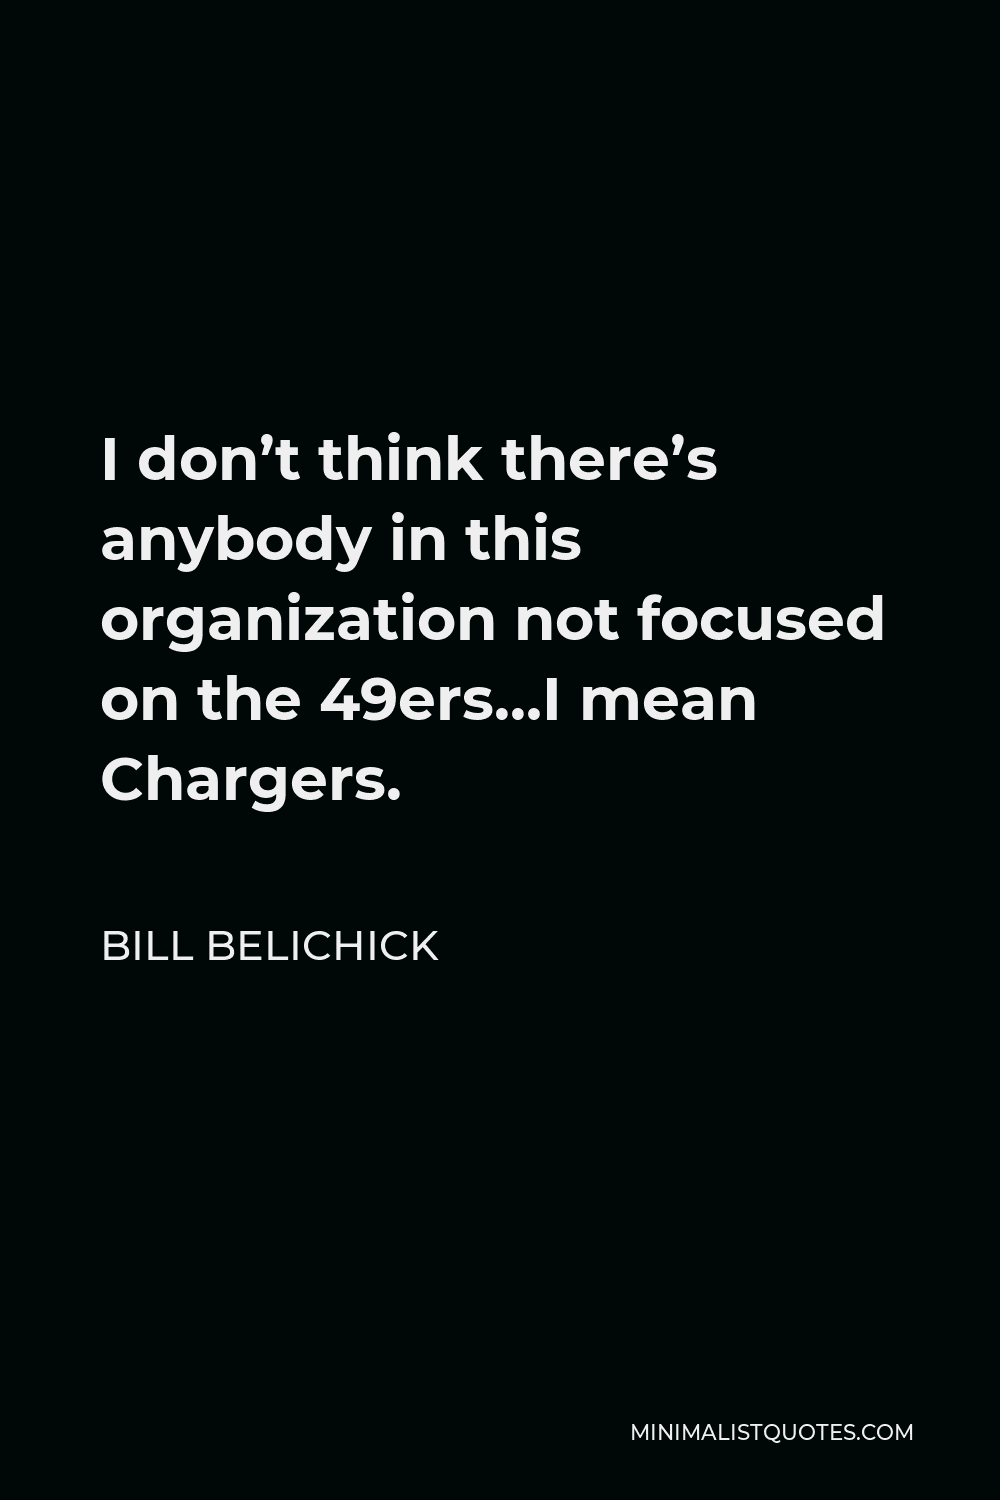 Bill Belichick Quote - I don’t think there’s anybody in this organization not focused on the 49ers…I mean Chargers.